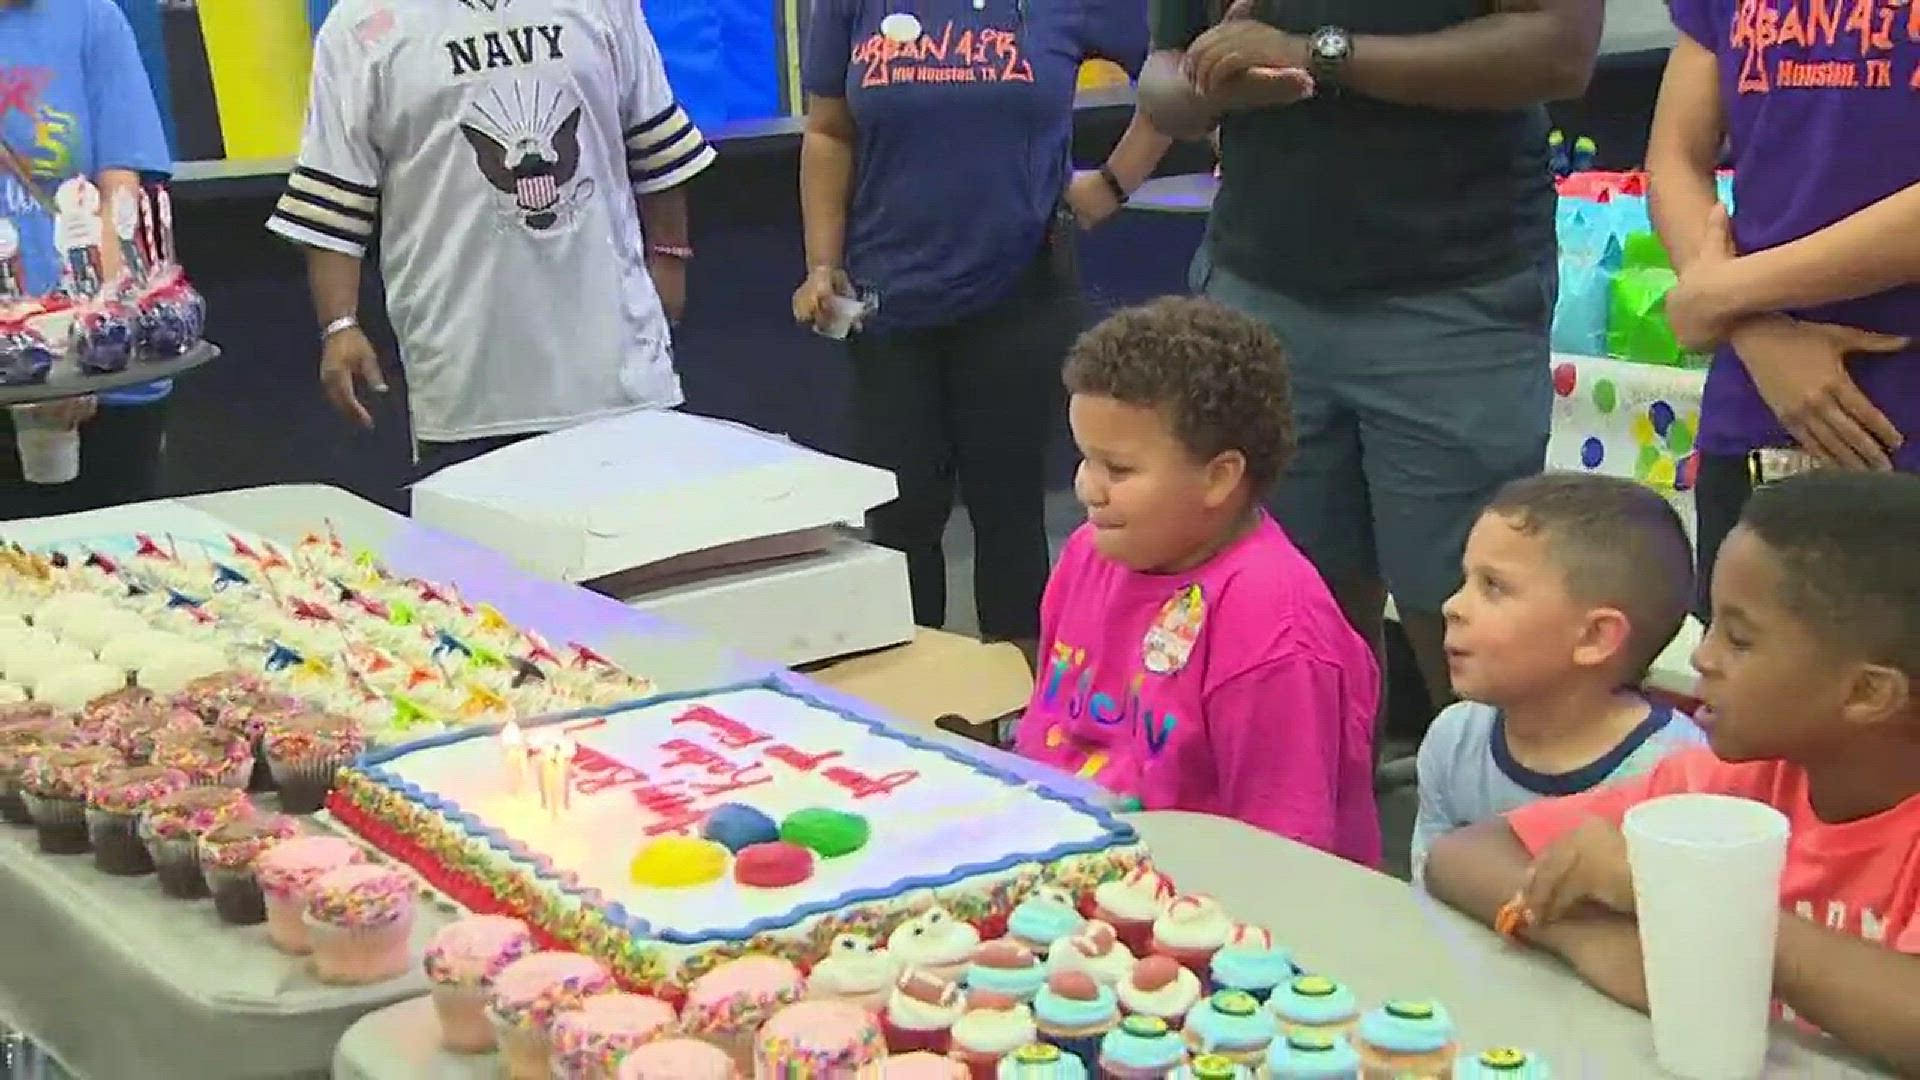 Thanks to a social media movement, hundreds of people gathered at a birthday party in Houston on Sunday for a little boy who told his mom he didn't want a birthday party because he thought no one would show up.